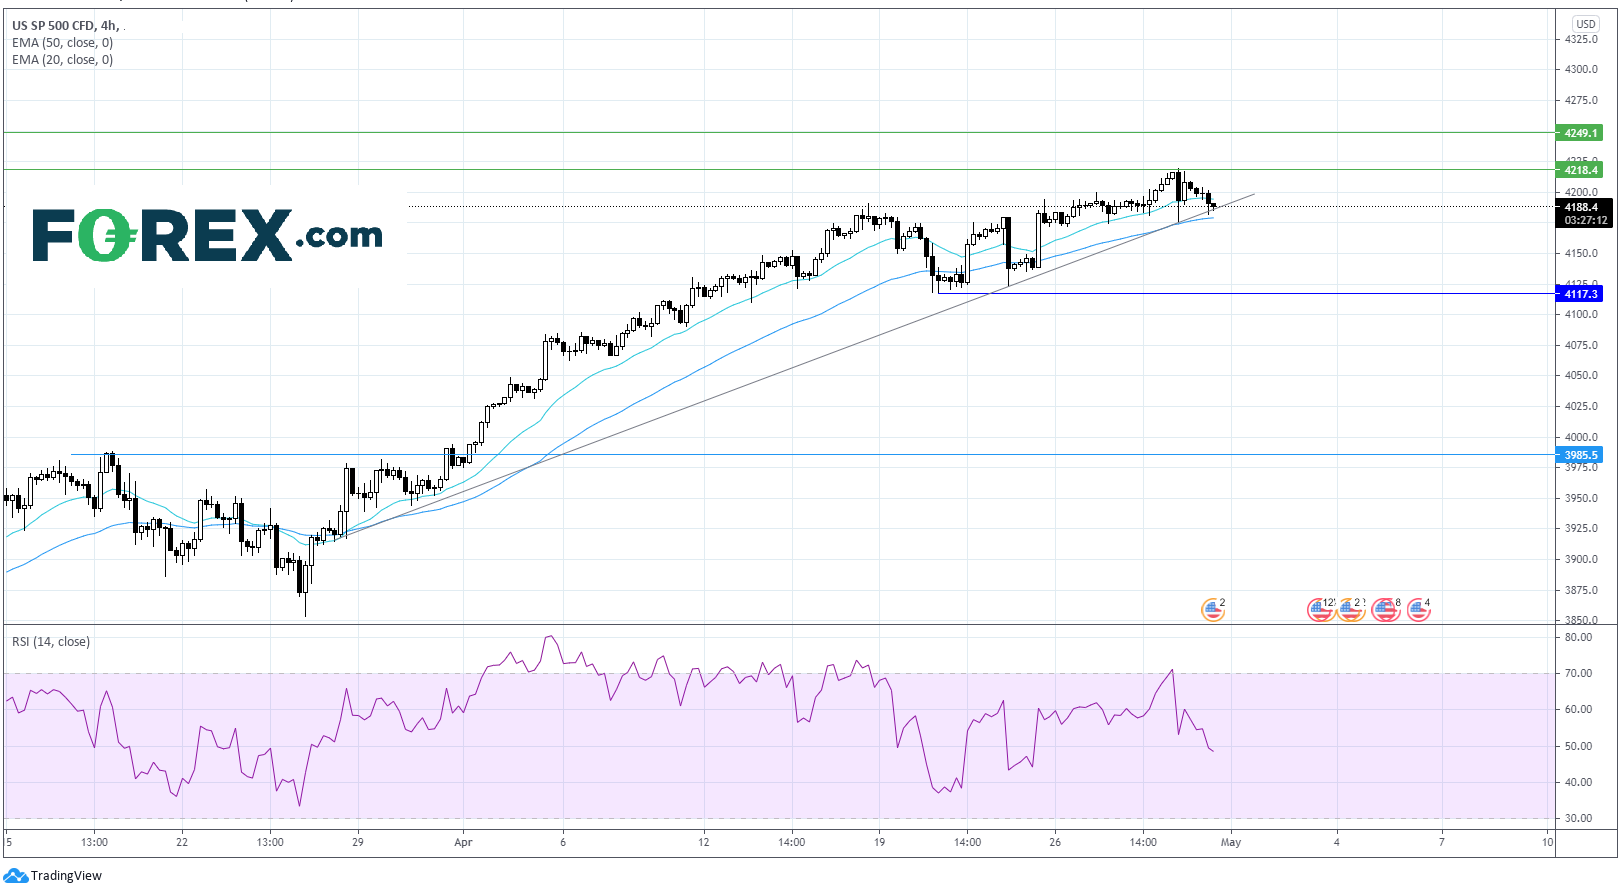 Chart analysis of US SP500. Published in April 2021 by FOREX.com